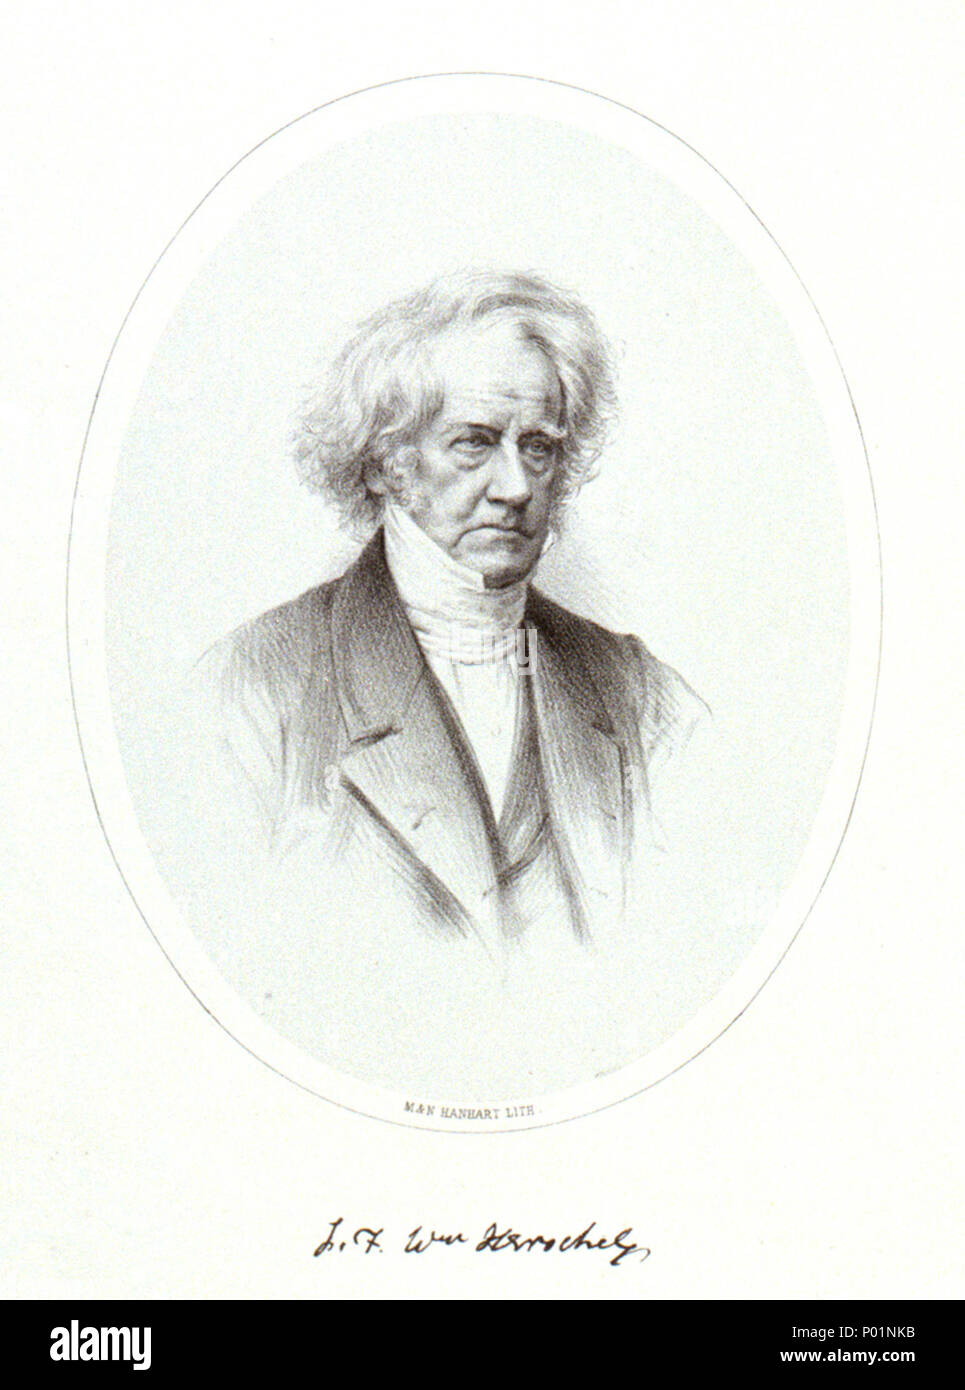 .  English: 'J.F.Wm. Herschel' This image, of John FW Herschel as an eminent grey haired Victorian (he would have been in his 70s), was originally produced as the frontispiece to John FW Herschel's Catalogue of nebulae and clusters of stars (1864), an updated version of his father's work, with plates by M. & N. Hanhart. The image was subsequently used (in 1882) by the journal, the Quarterly Journal of Science No. 19. The NMM has four copies of this image, only one of which (PAH6064) appears to be from the Quarterly Journal of Science. The rest may have been extra prints made at the same time a Stock Photo